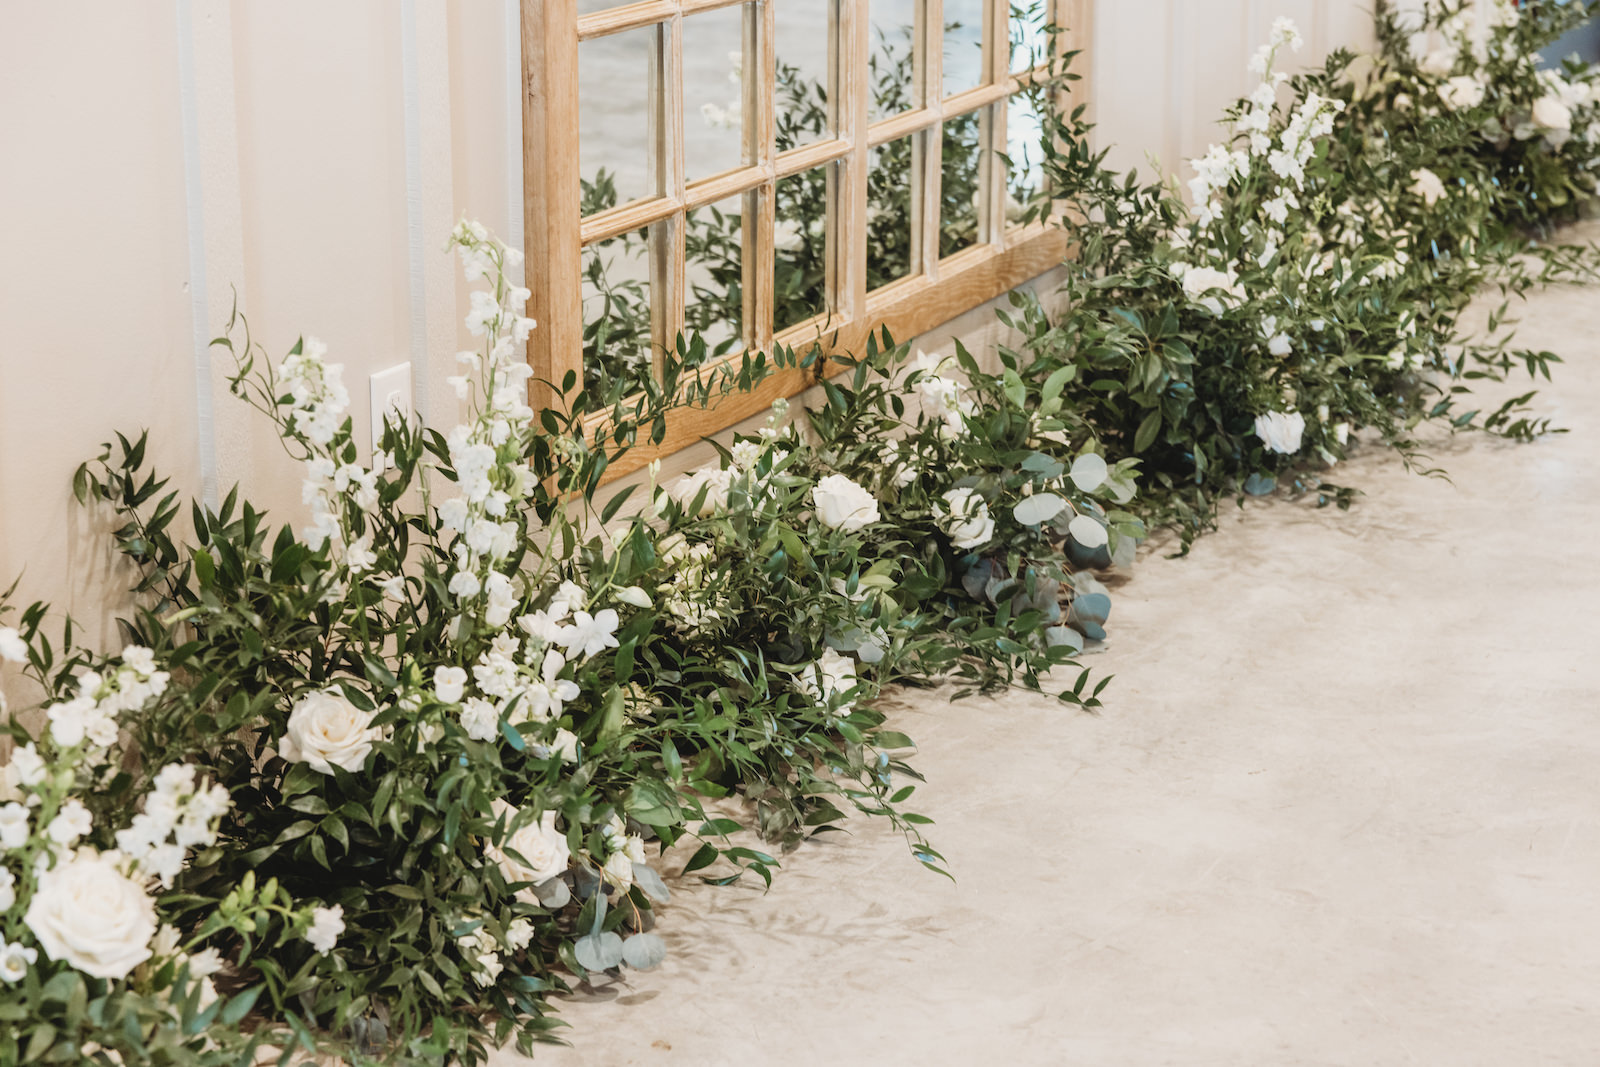 Classic Lush White Roses and Greenery Lush Wedding Floral Arrangements